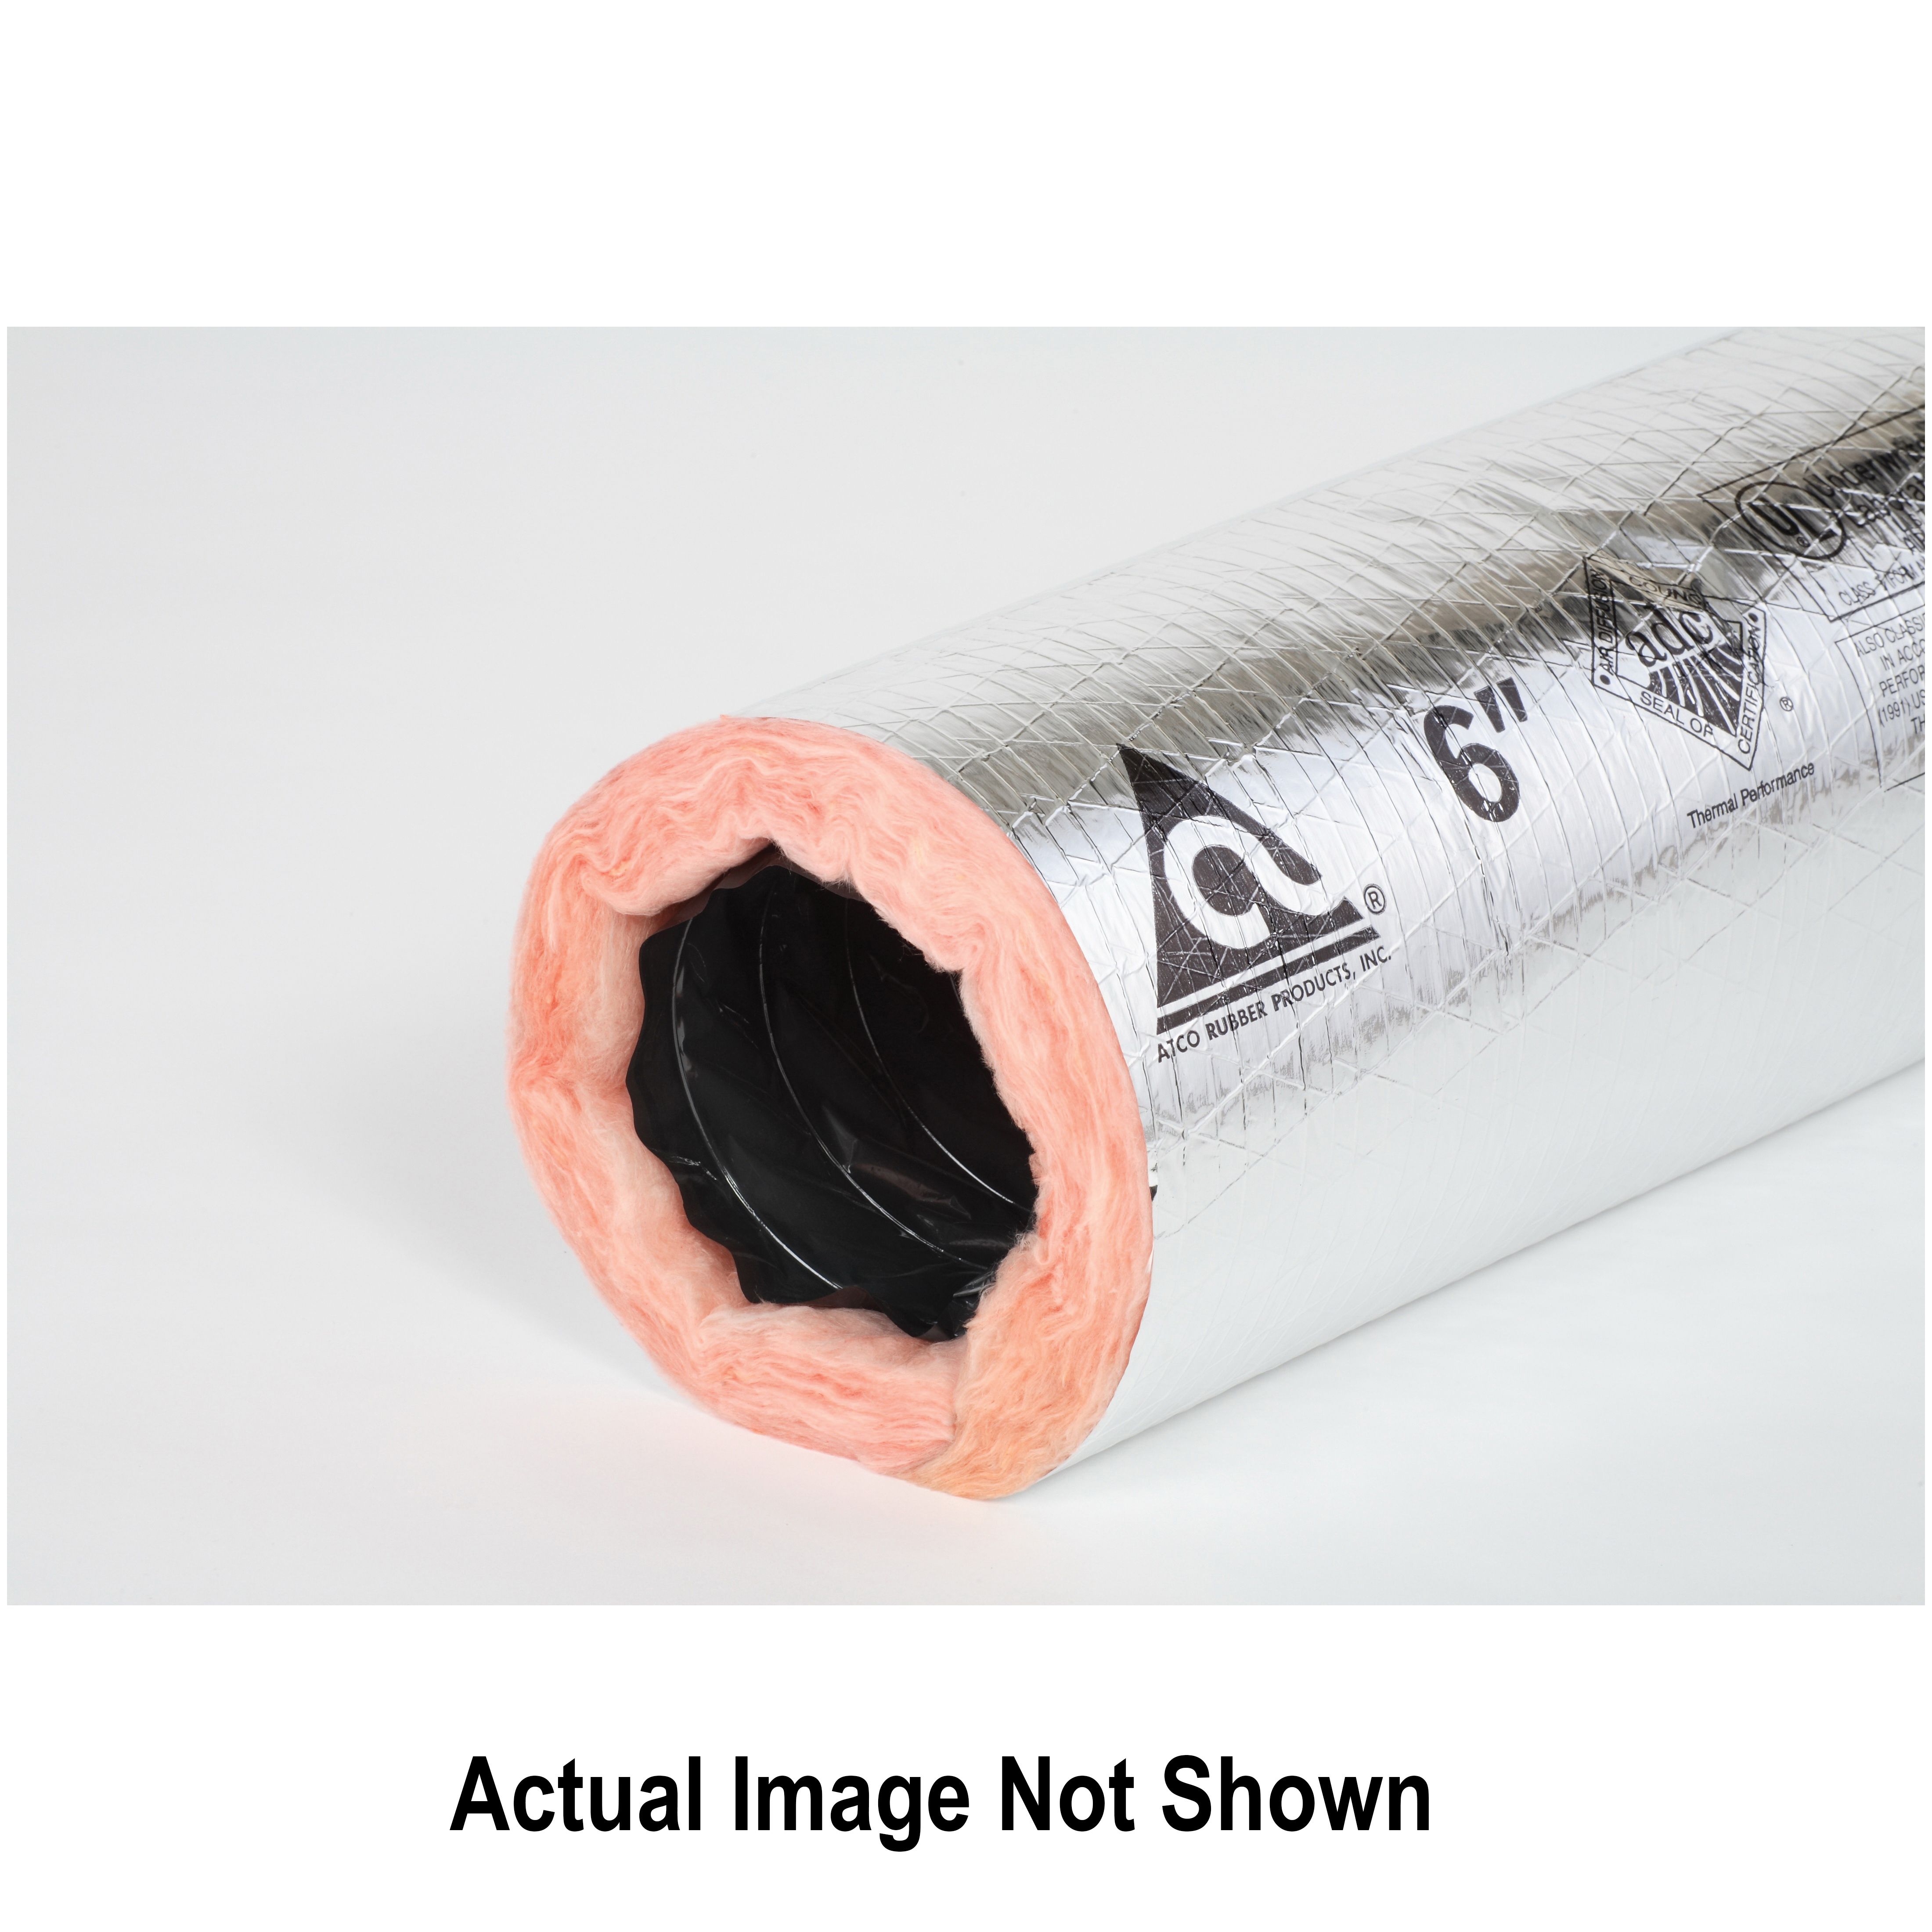 Products  L1978, ATCO Rubber, Atco 036 Double-Ply Flexible Insulated Air  Duct, 14 in ID, 25 ft L, 5000 fpm: Heating & Air Conditioning, Air  Distribution, Ducting